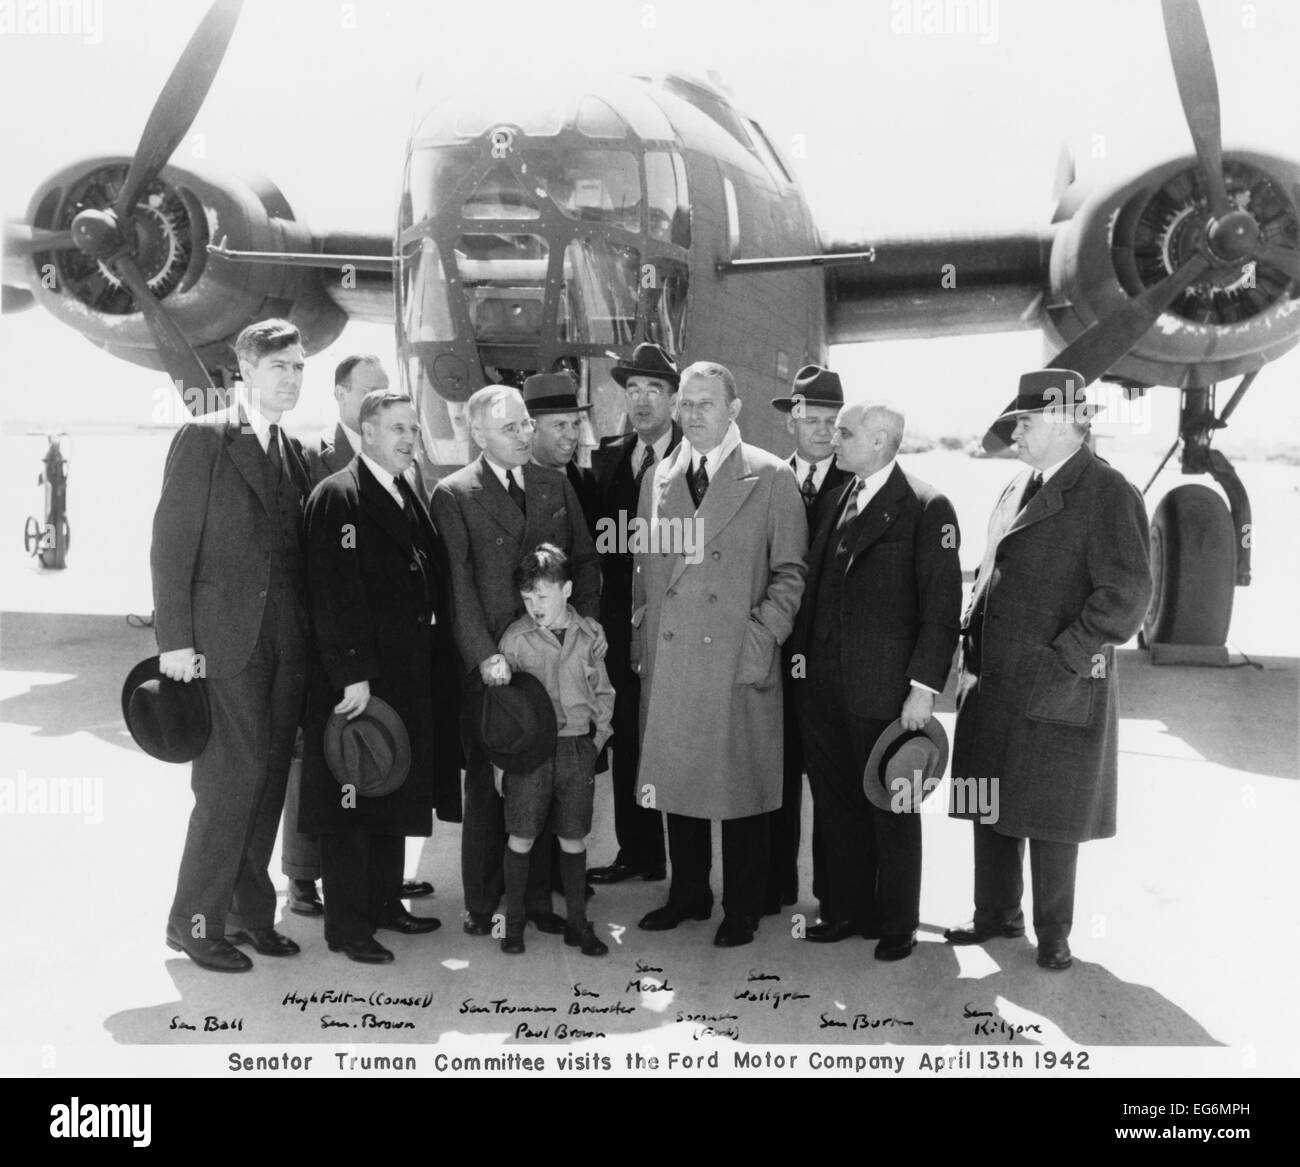 Senator Truman's committee visits the Ford Motor Company on April 13, 1942. The war production oversight committee, 'Senate Stock Photo